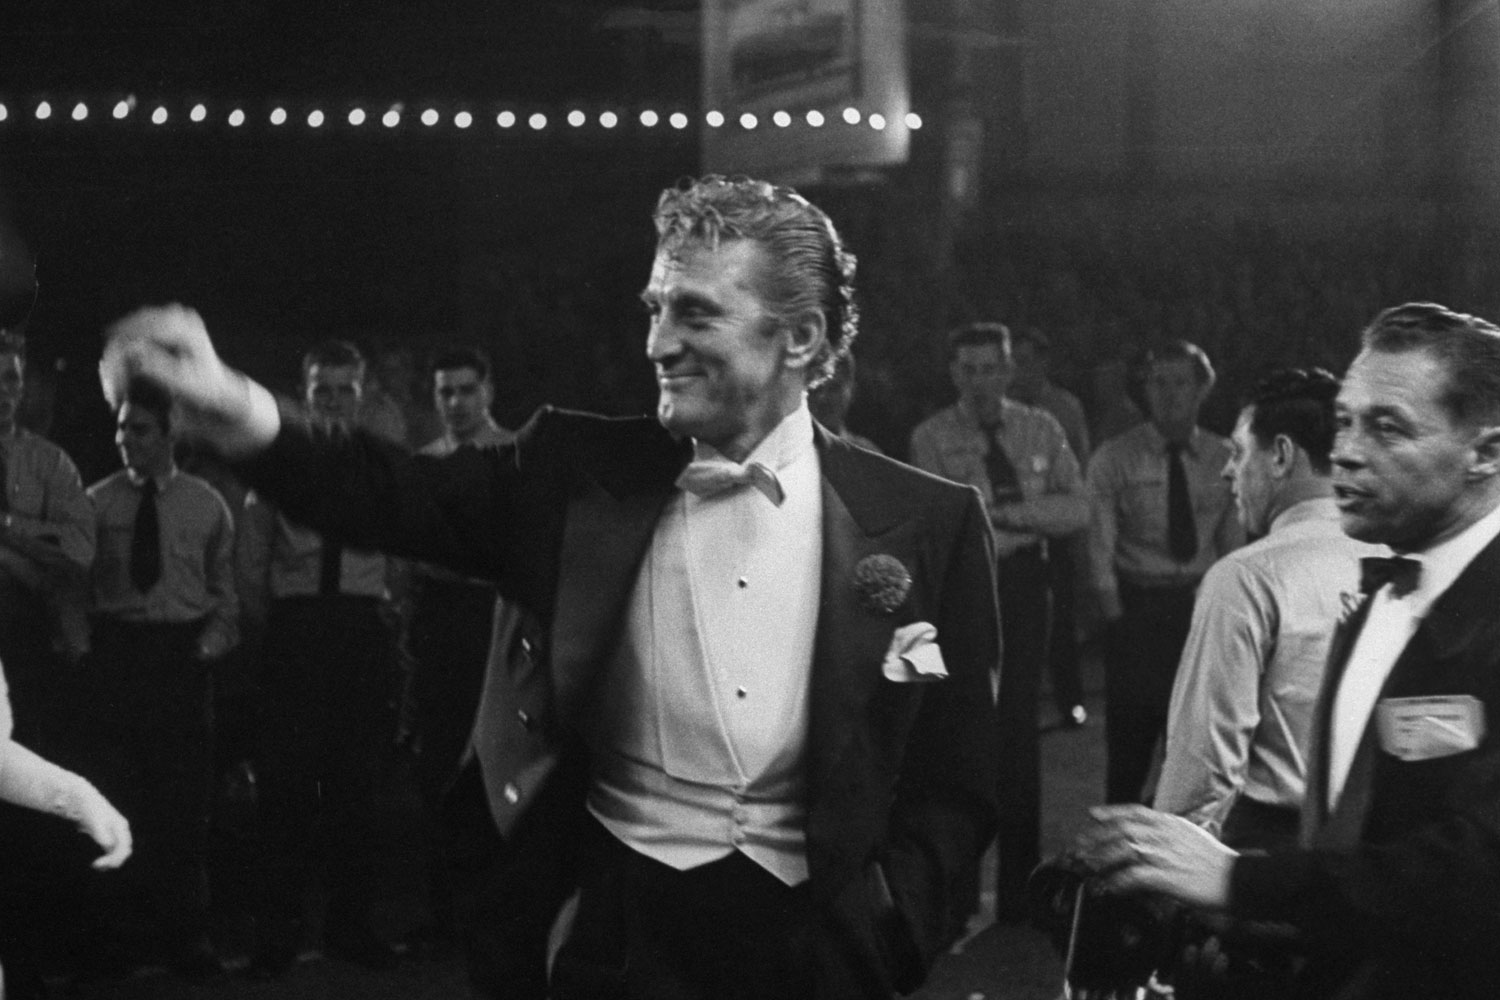 Kirk Douglas, elegant in white tie, smiles and waves as he enters the RKO Pantages Theater in 1954.